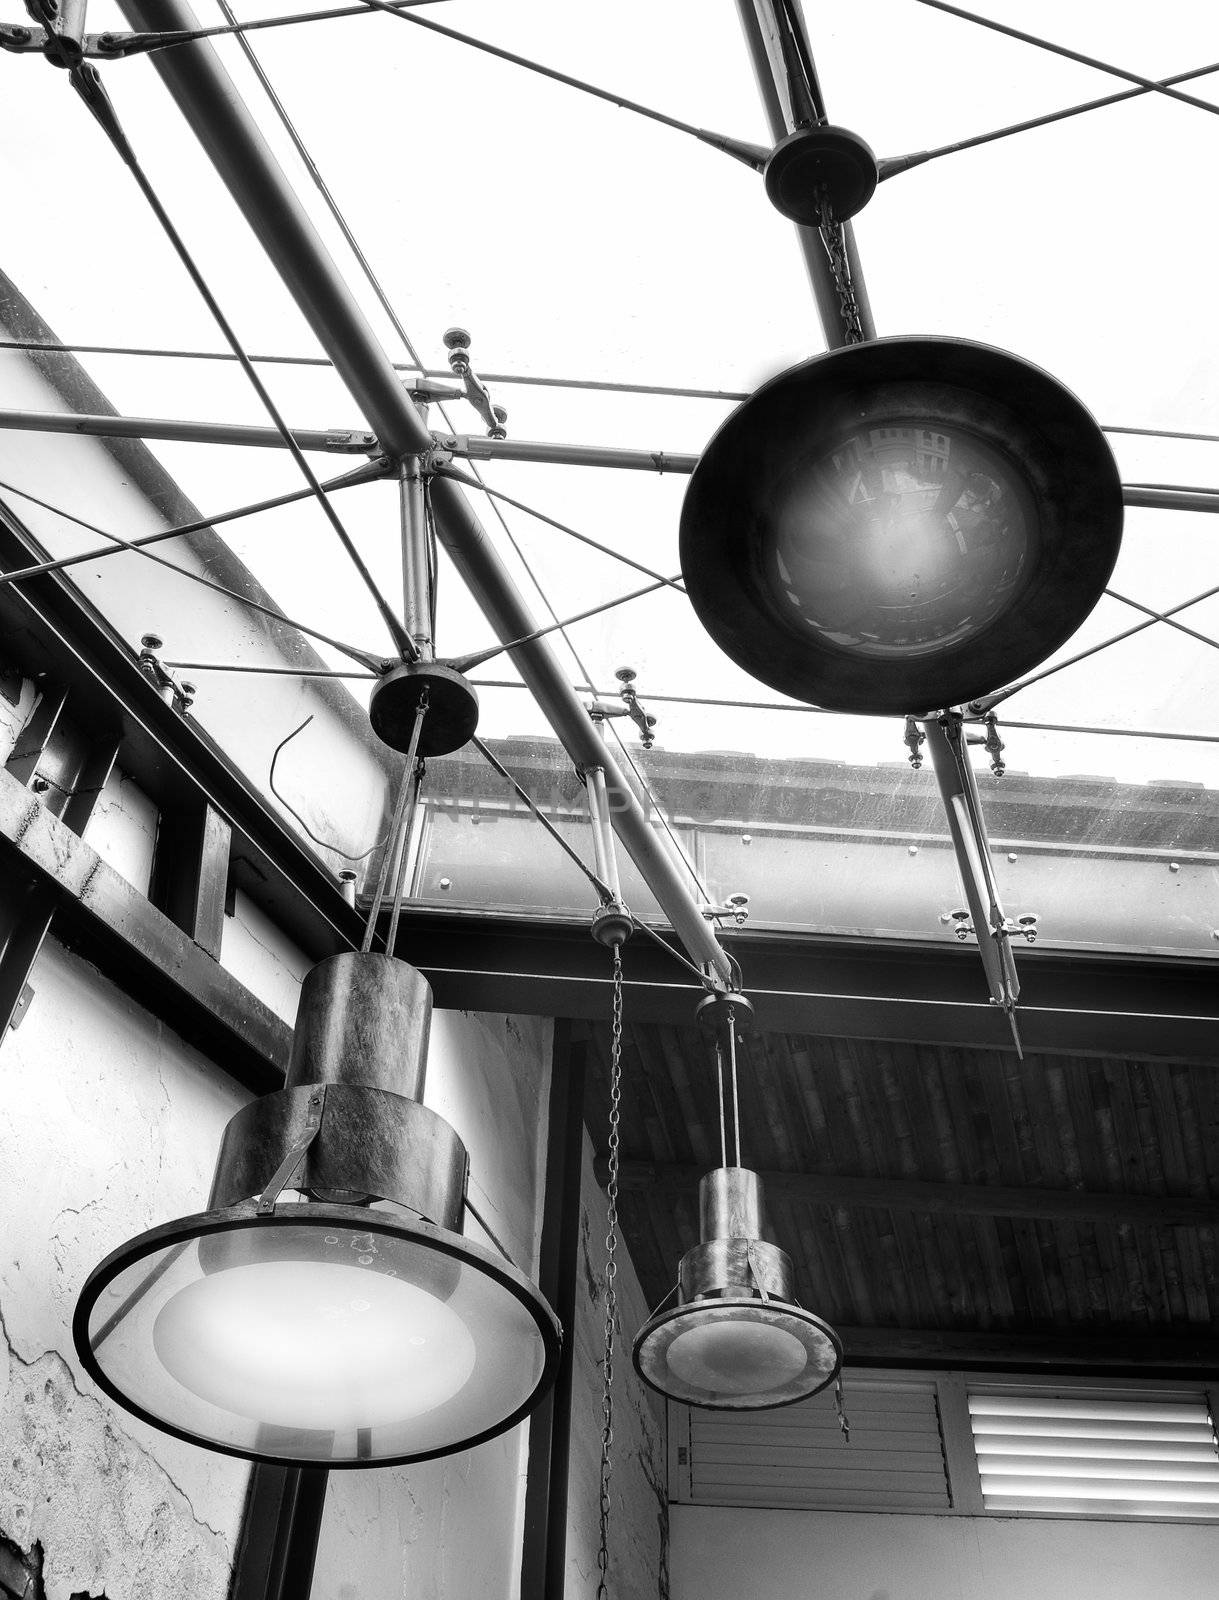 Abstract interior architecture of lamp with black and white tone.